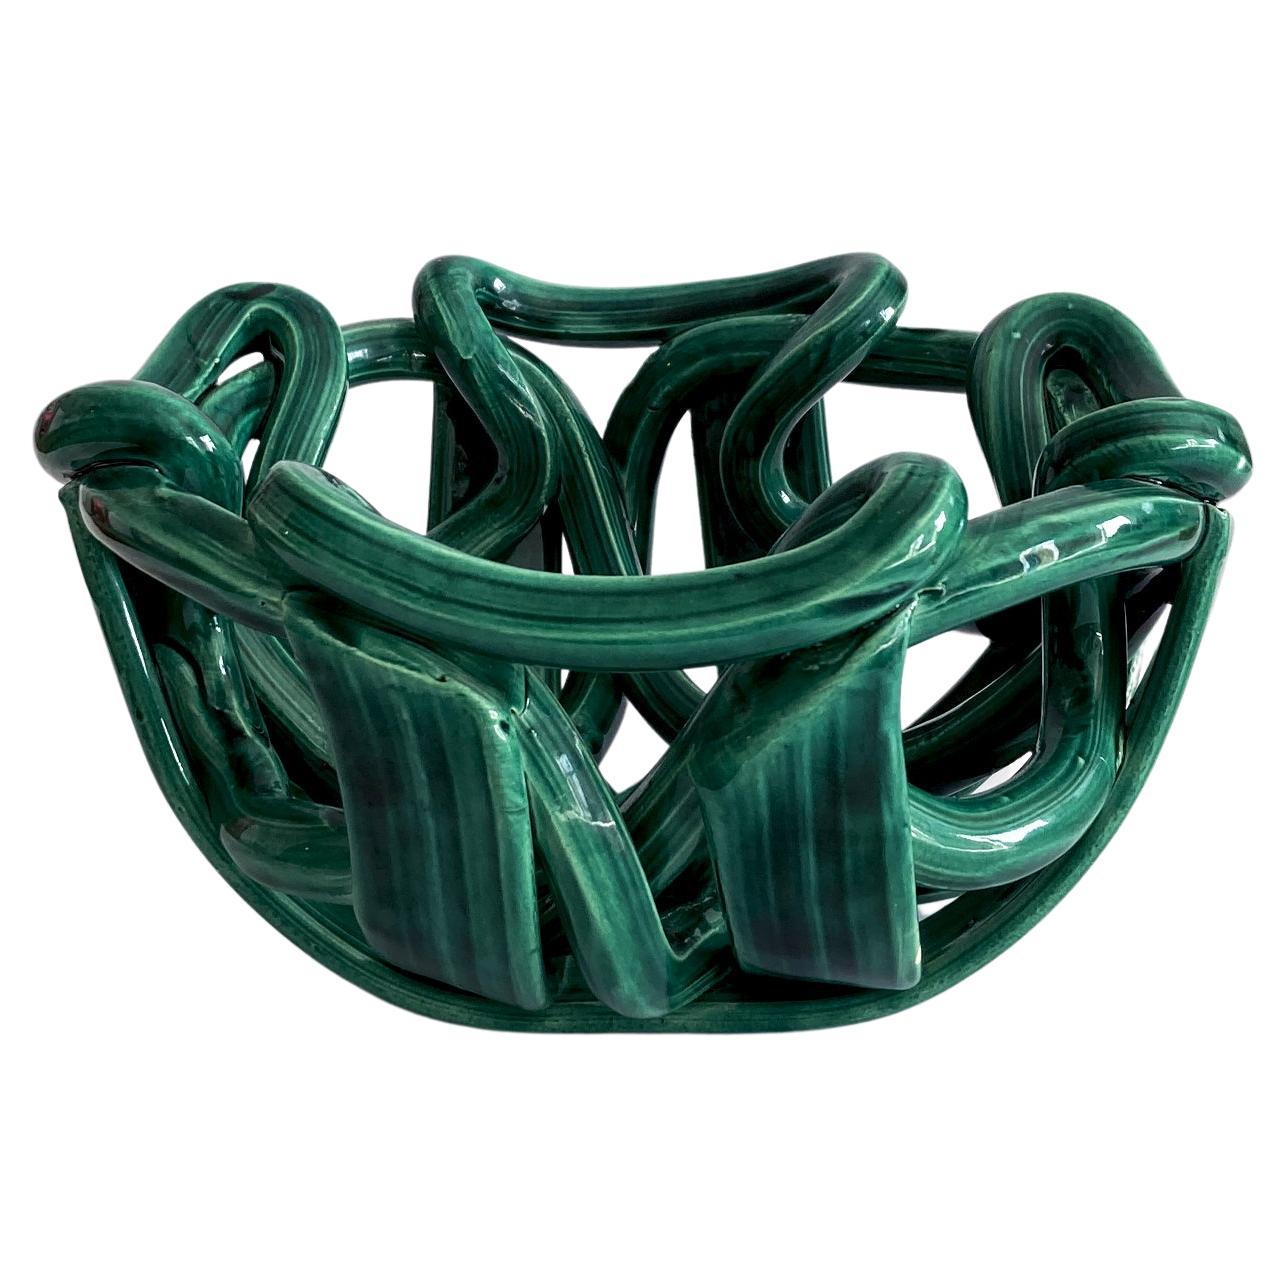 Midcentury Green Ceramic Braided Woven Abstract Centerpiece Bowl